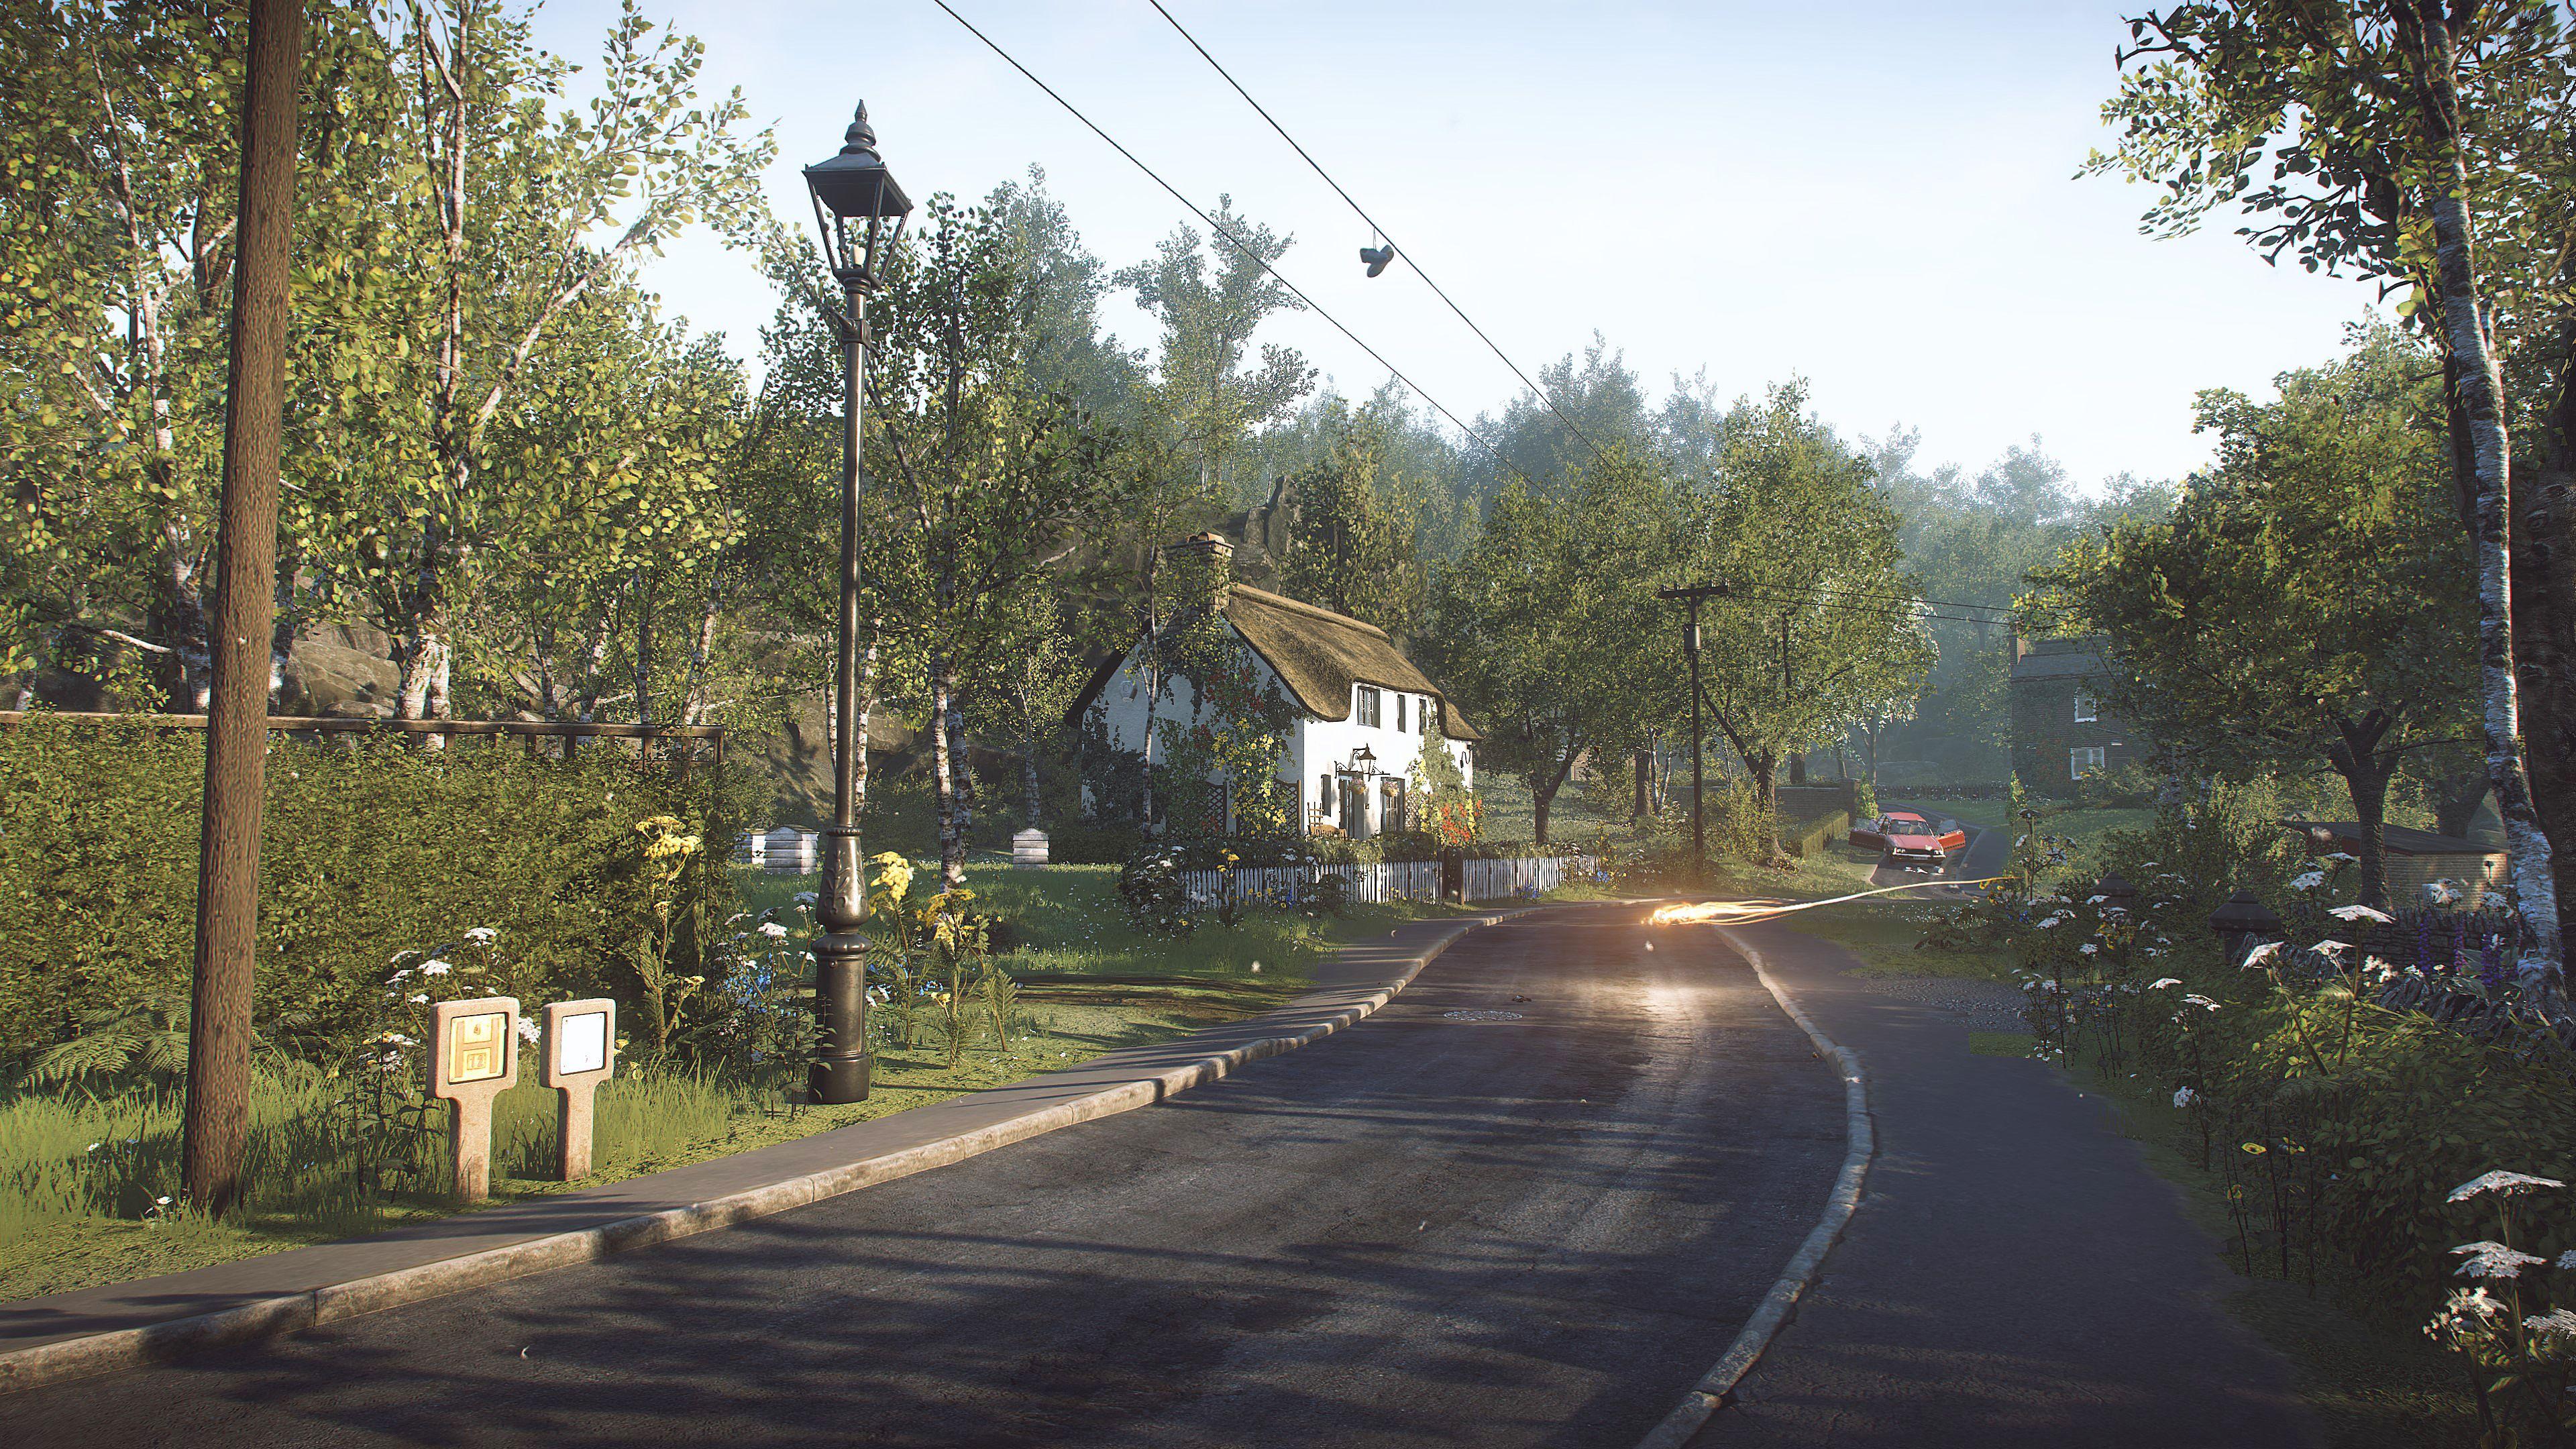 everybody s gone to the rapture download